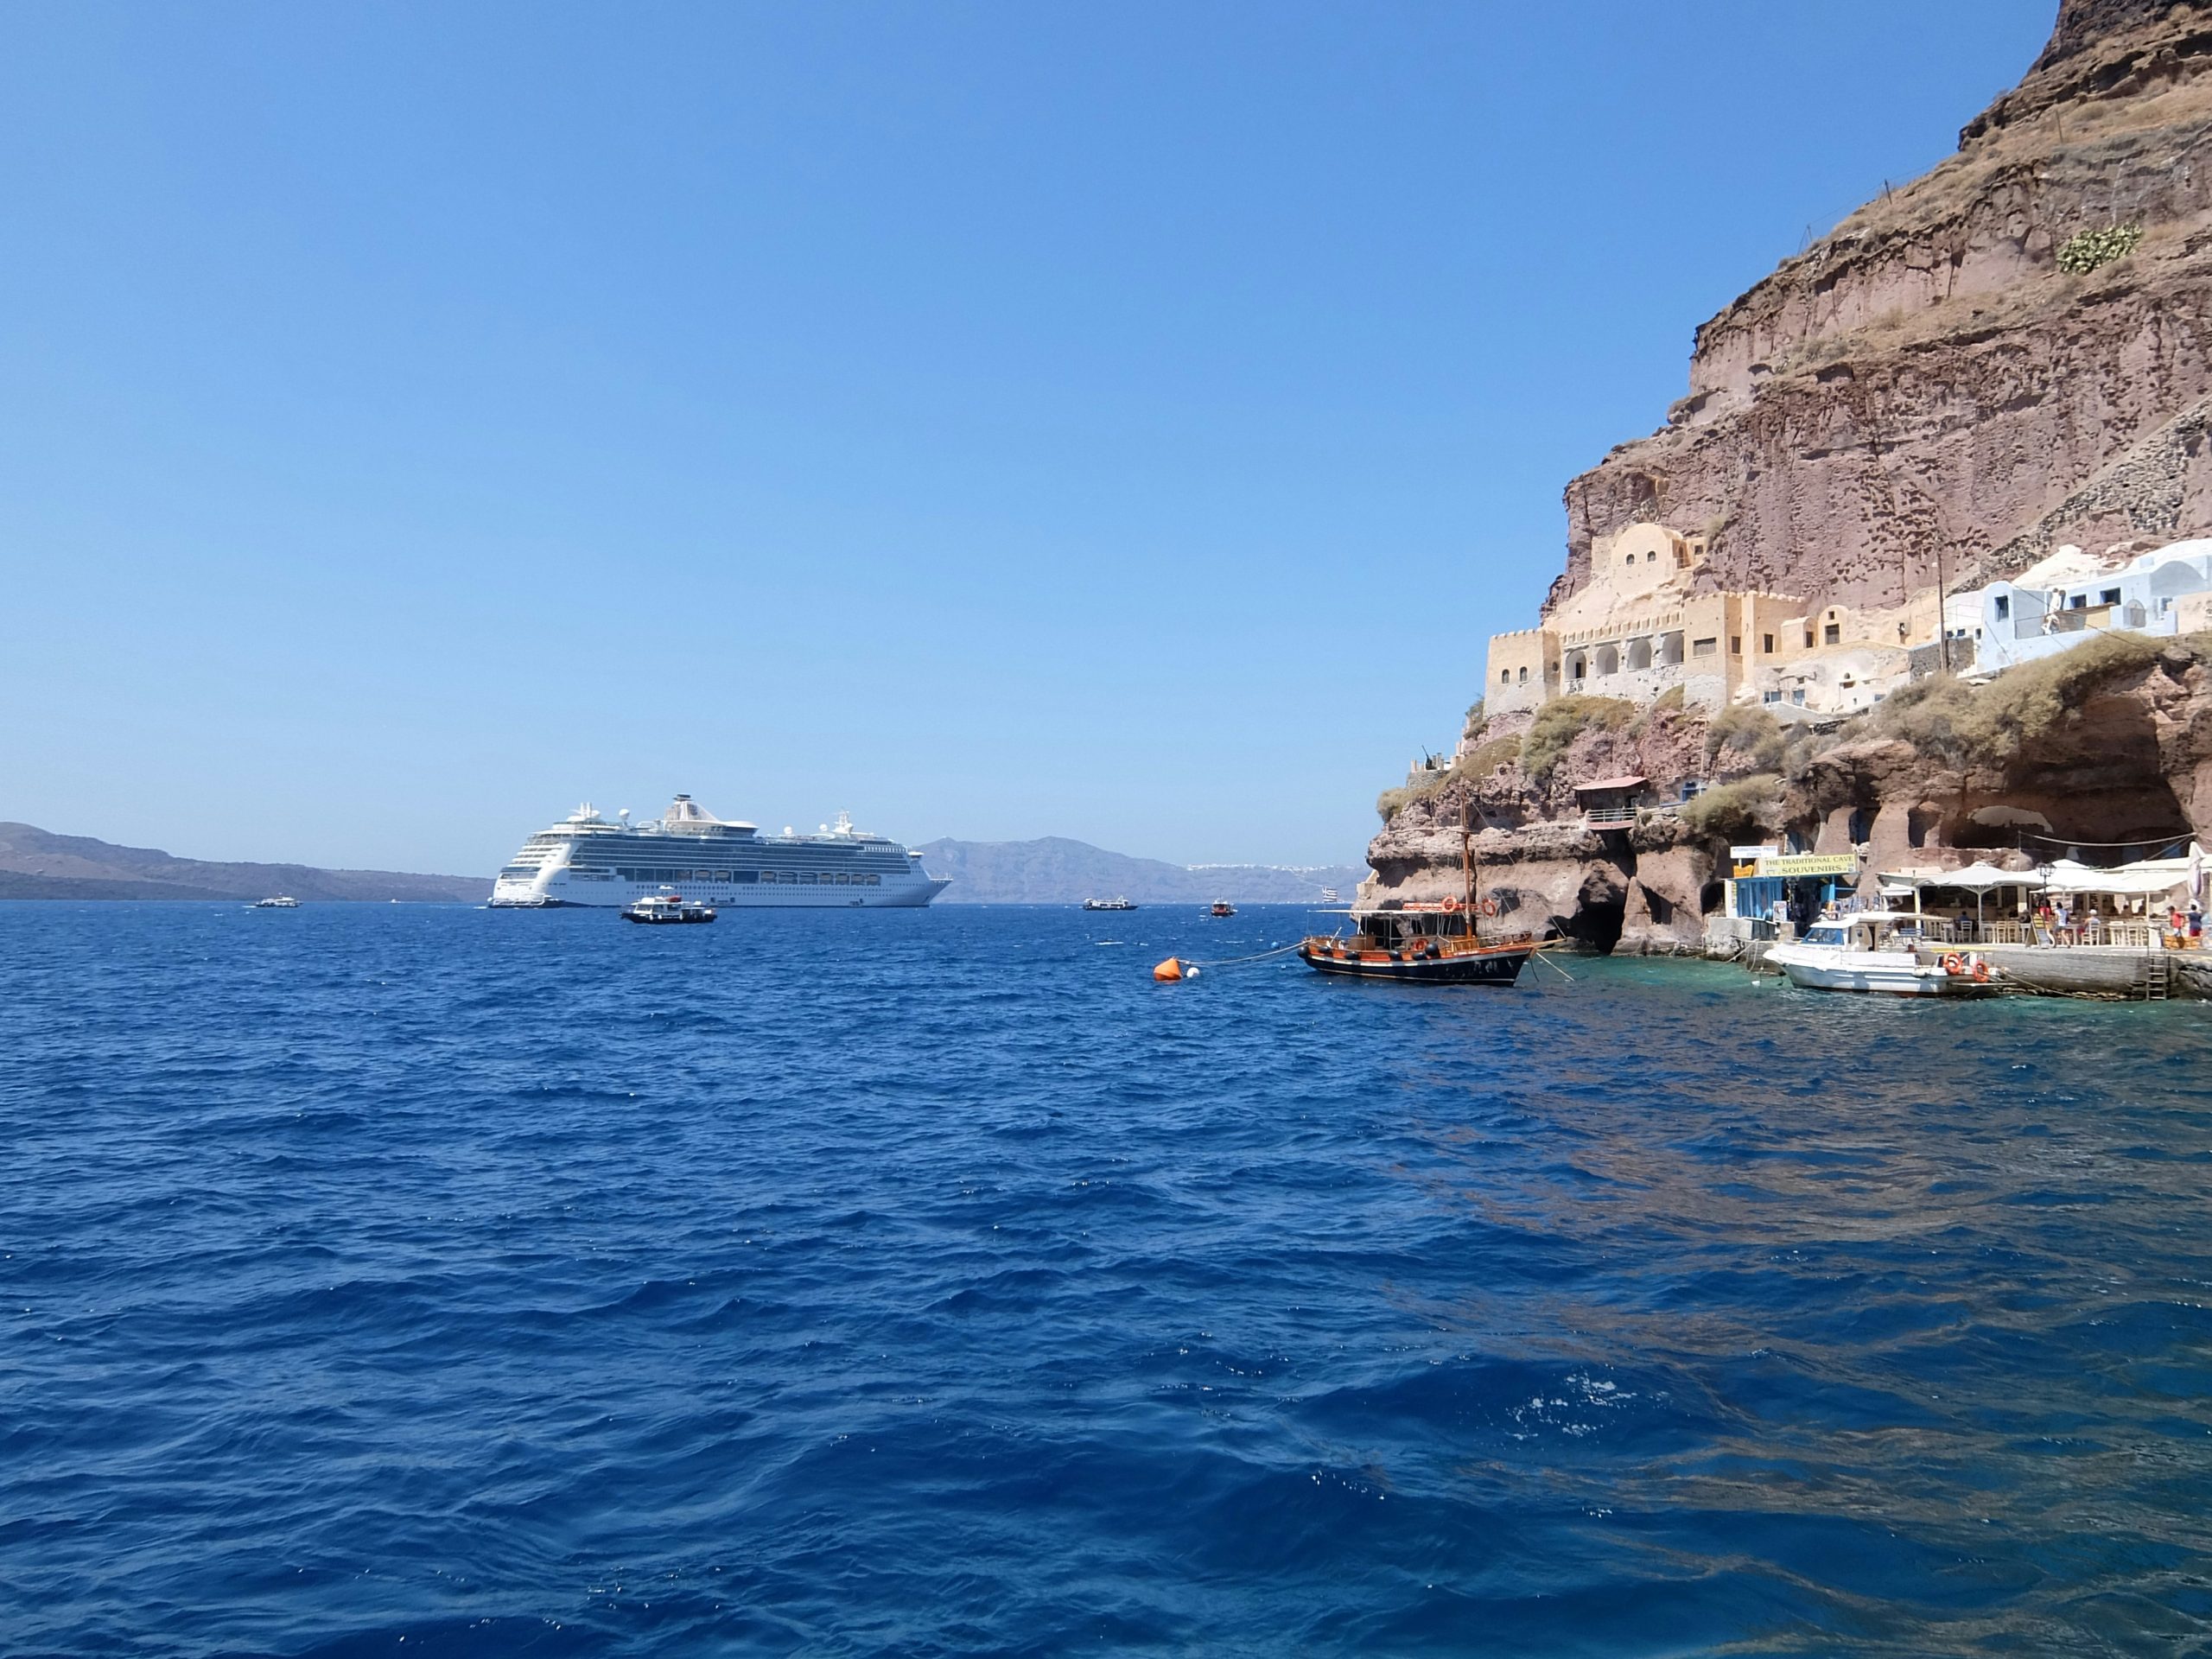 discover the beauty of greece with unforgettable island cruises. explore stunning beaches, ancient ruins, and charming villages on a greek island cruise adventure.